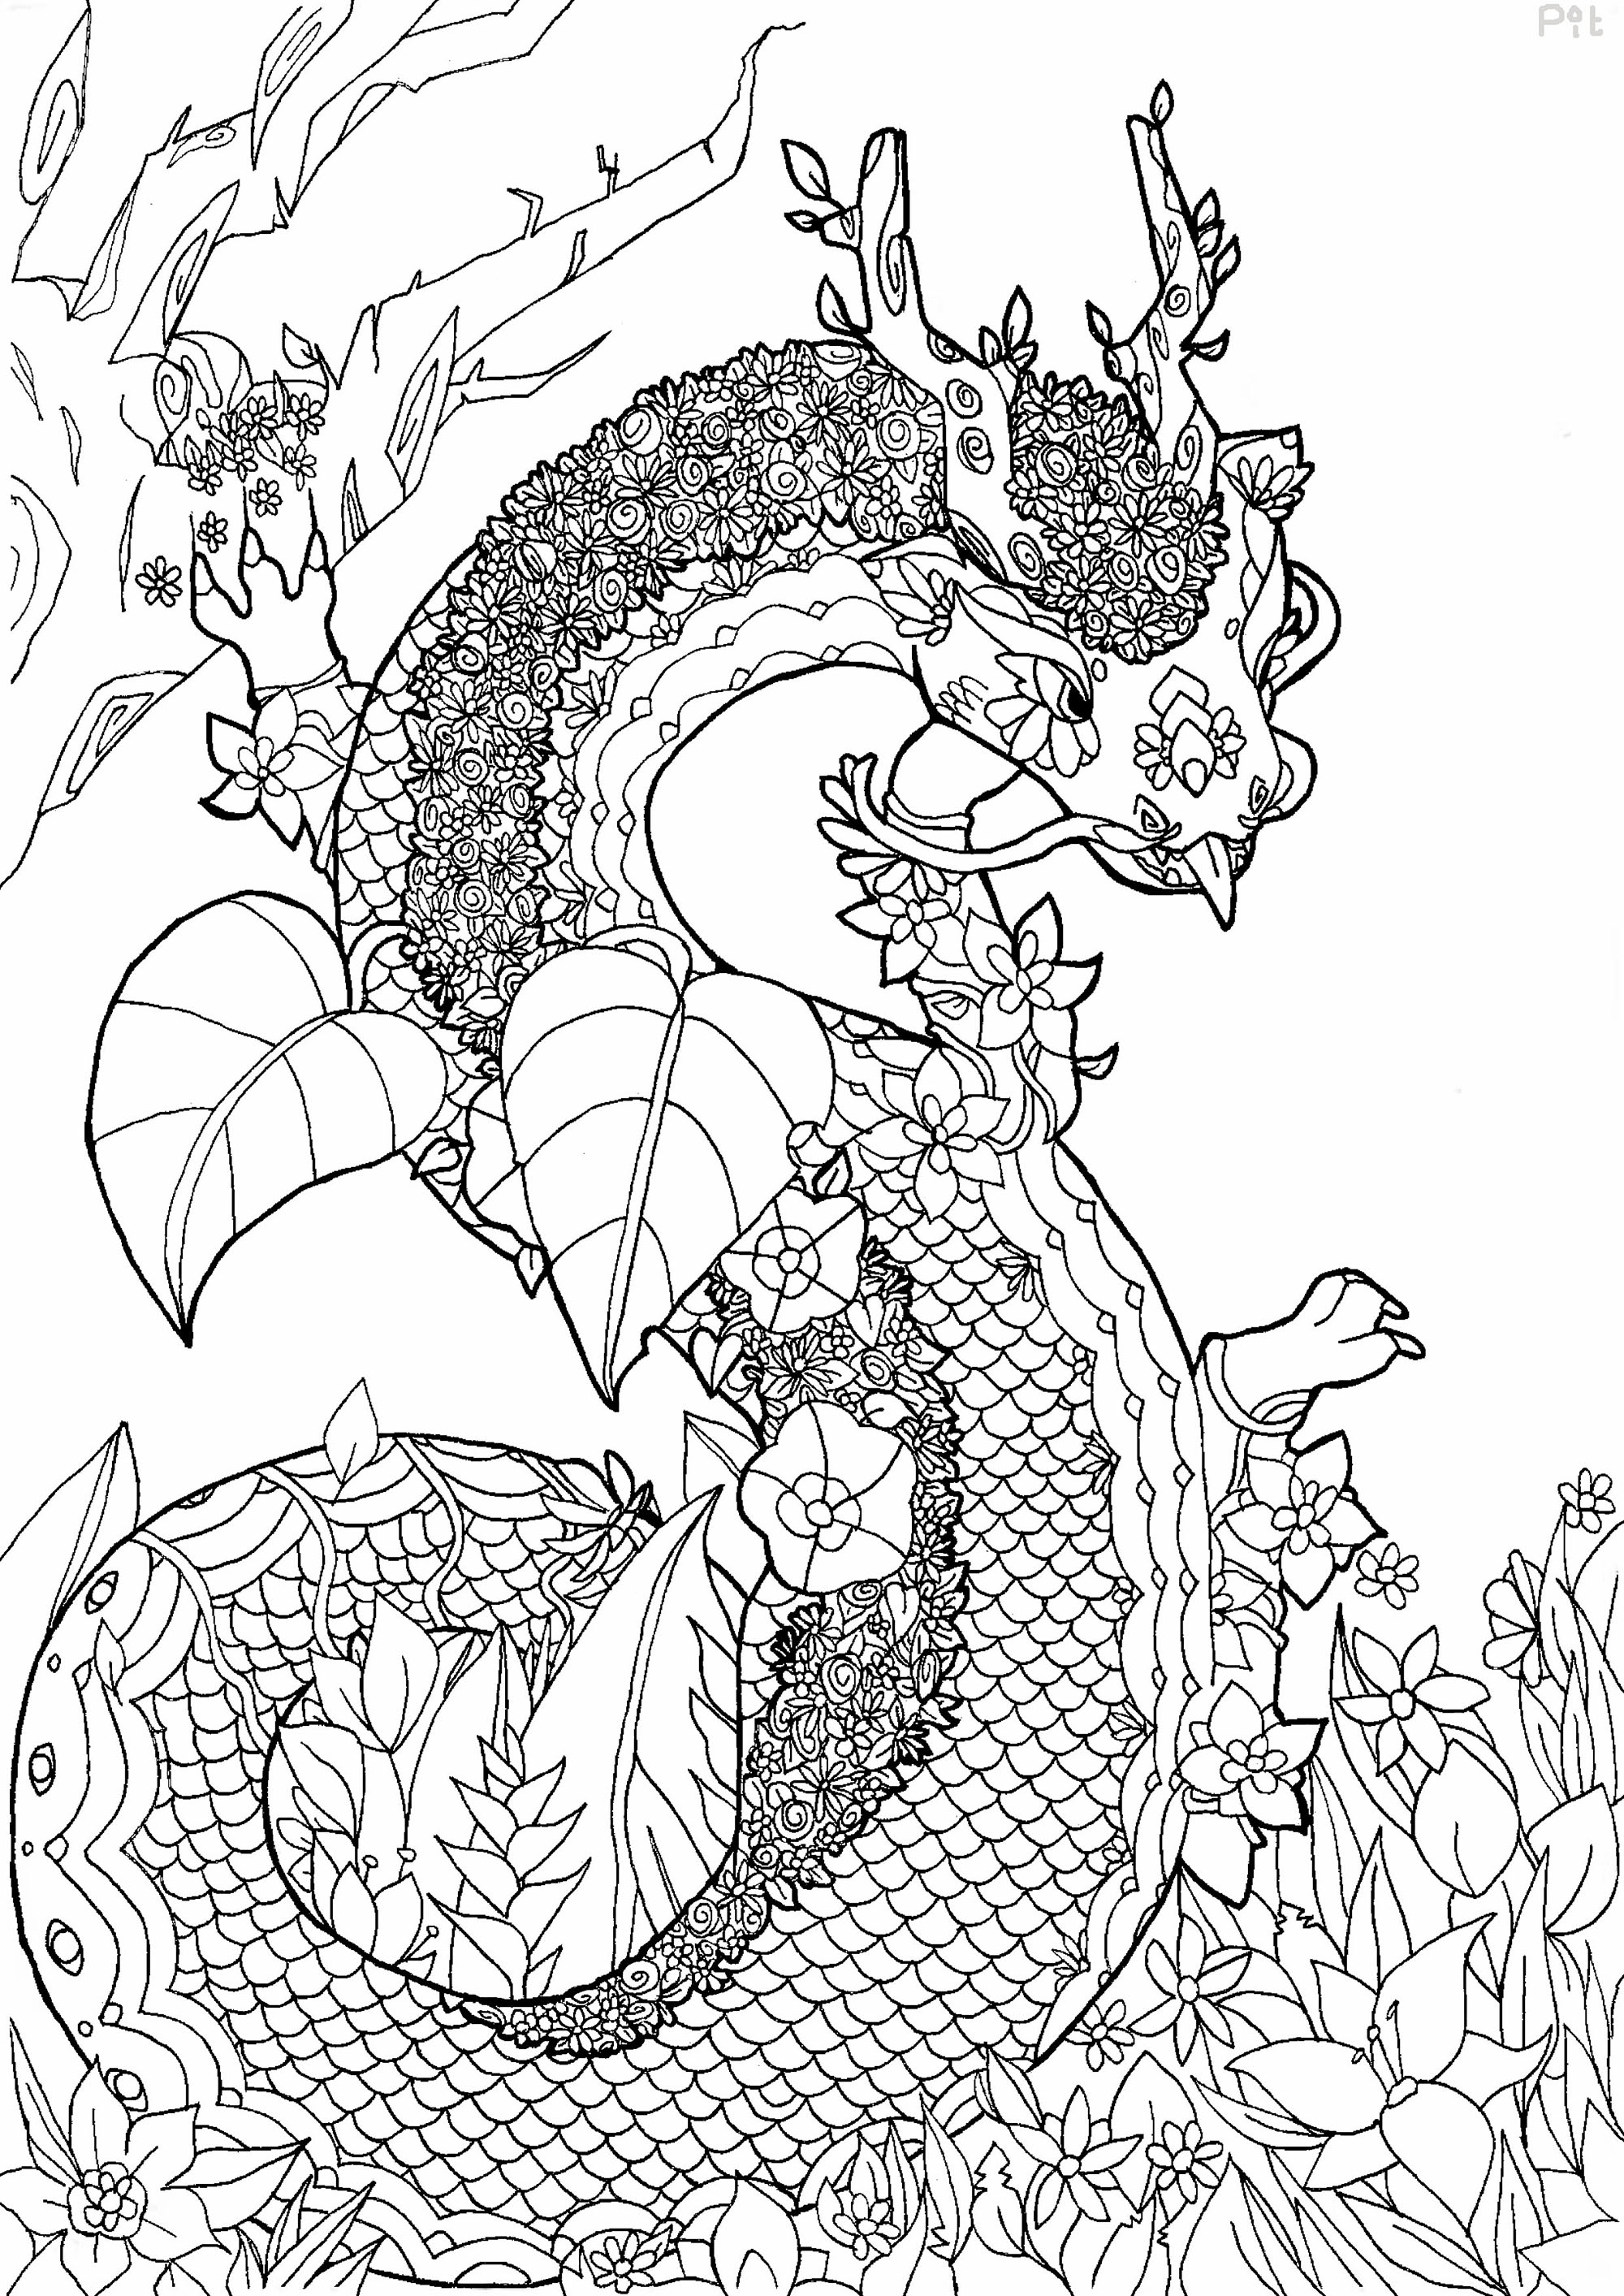 A magnificent dragon surrounded by flowers, Artist : Pauline